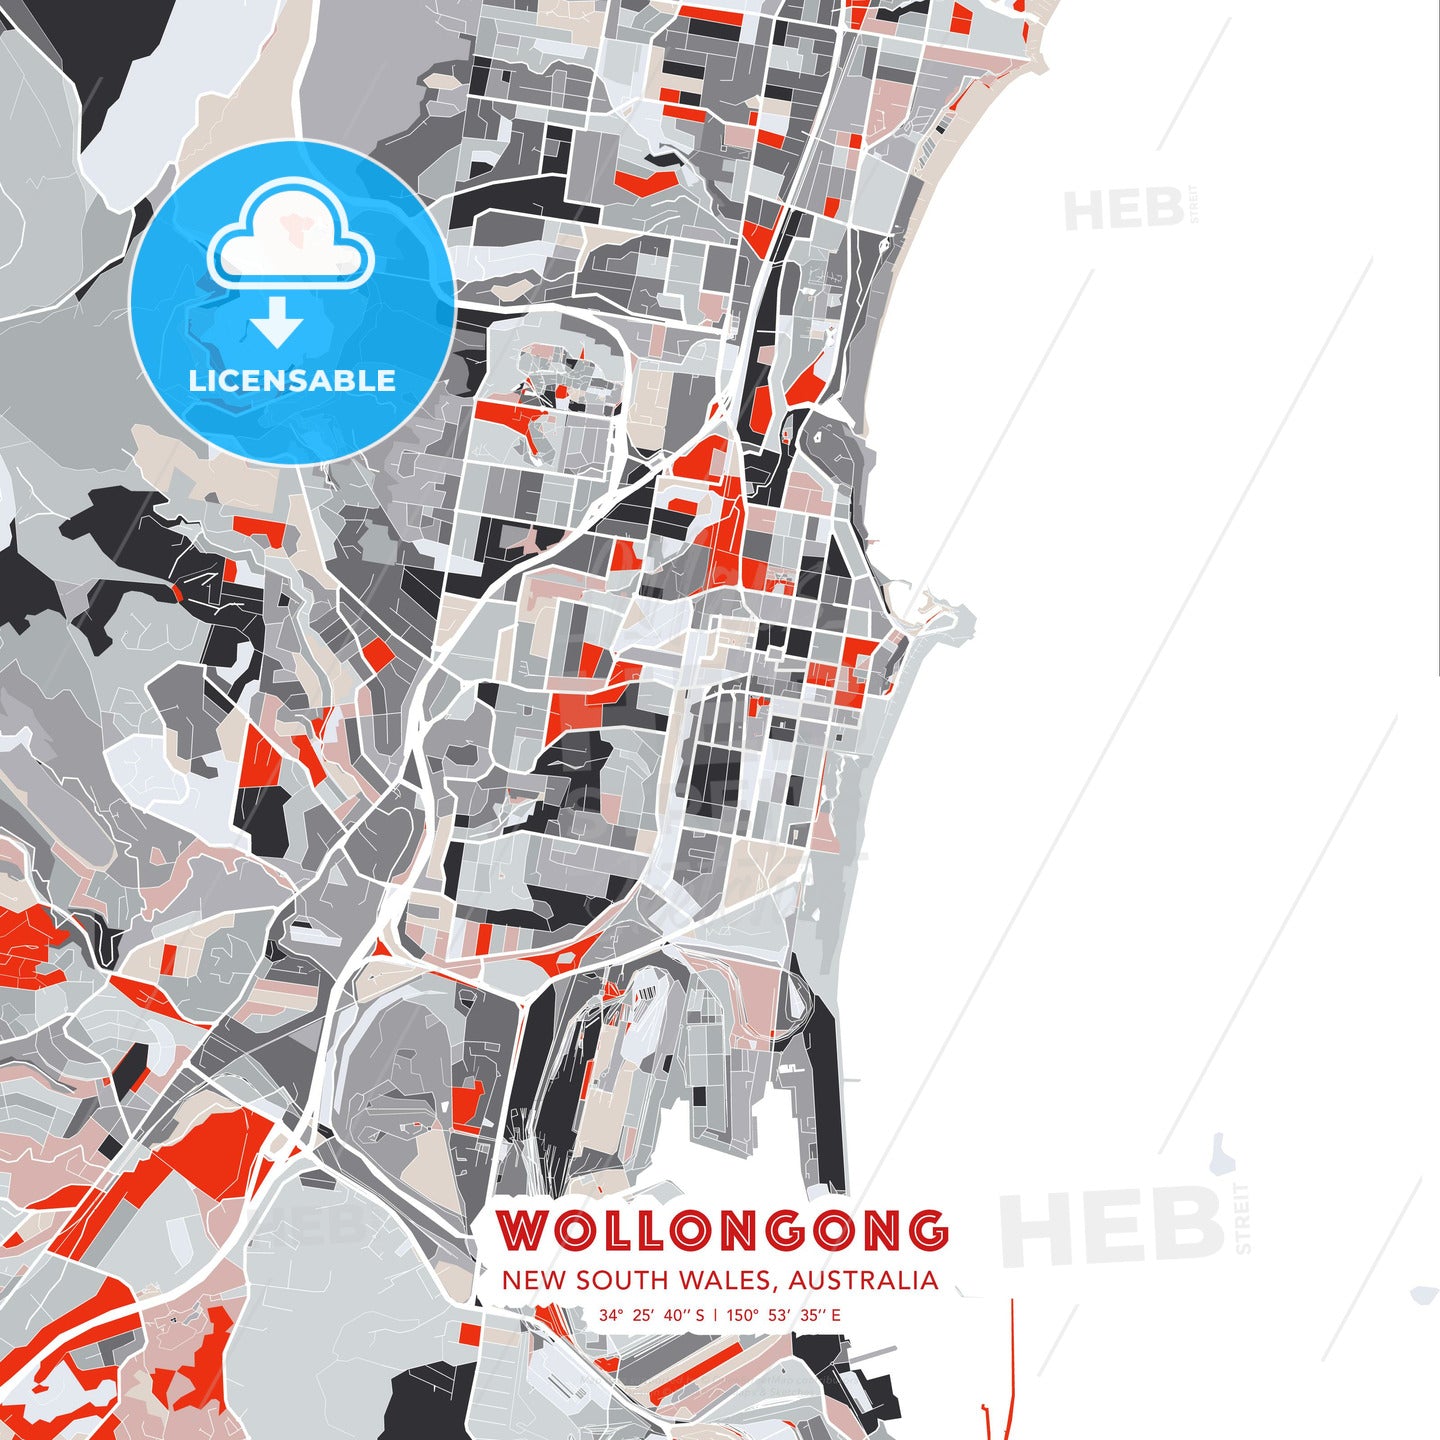 Wollongong, New South Wales, Australia, modern map - HEBSTREITS Sketches